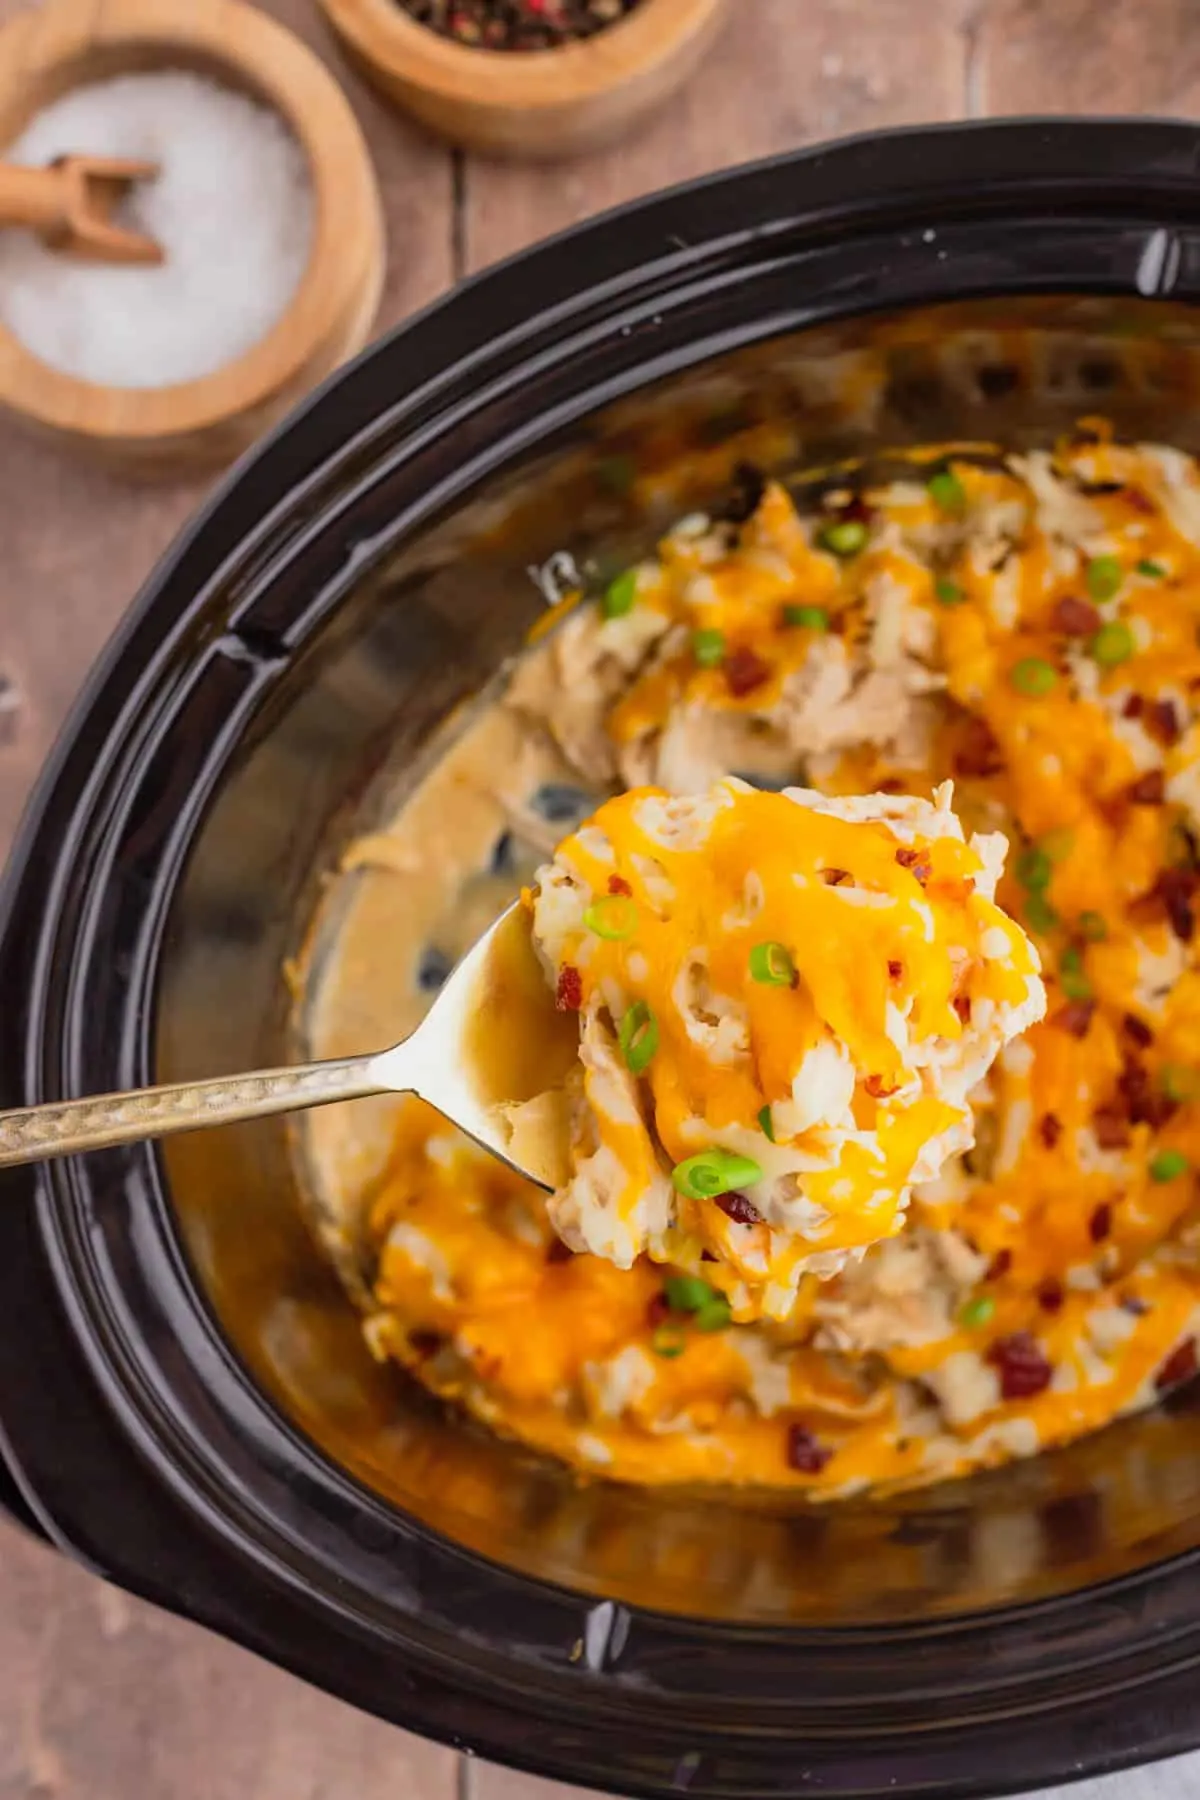 Crock Pot Crack Chicken is a creamy slow cooker chicken dish loaded with ranch dressing, shredded chicken, cream cheese, bacon, shredded cheese and chopped green onions.